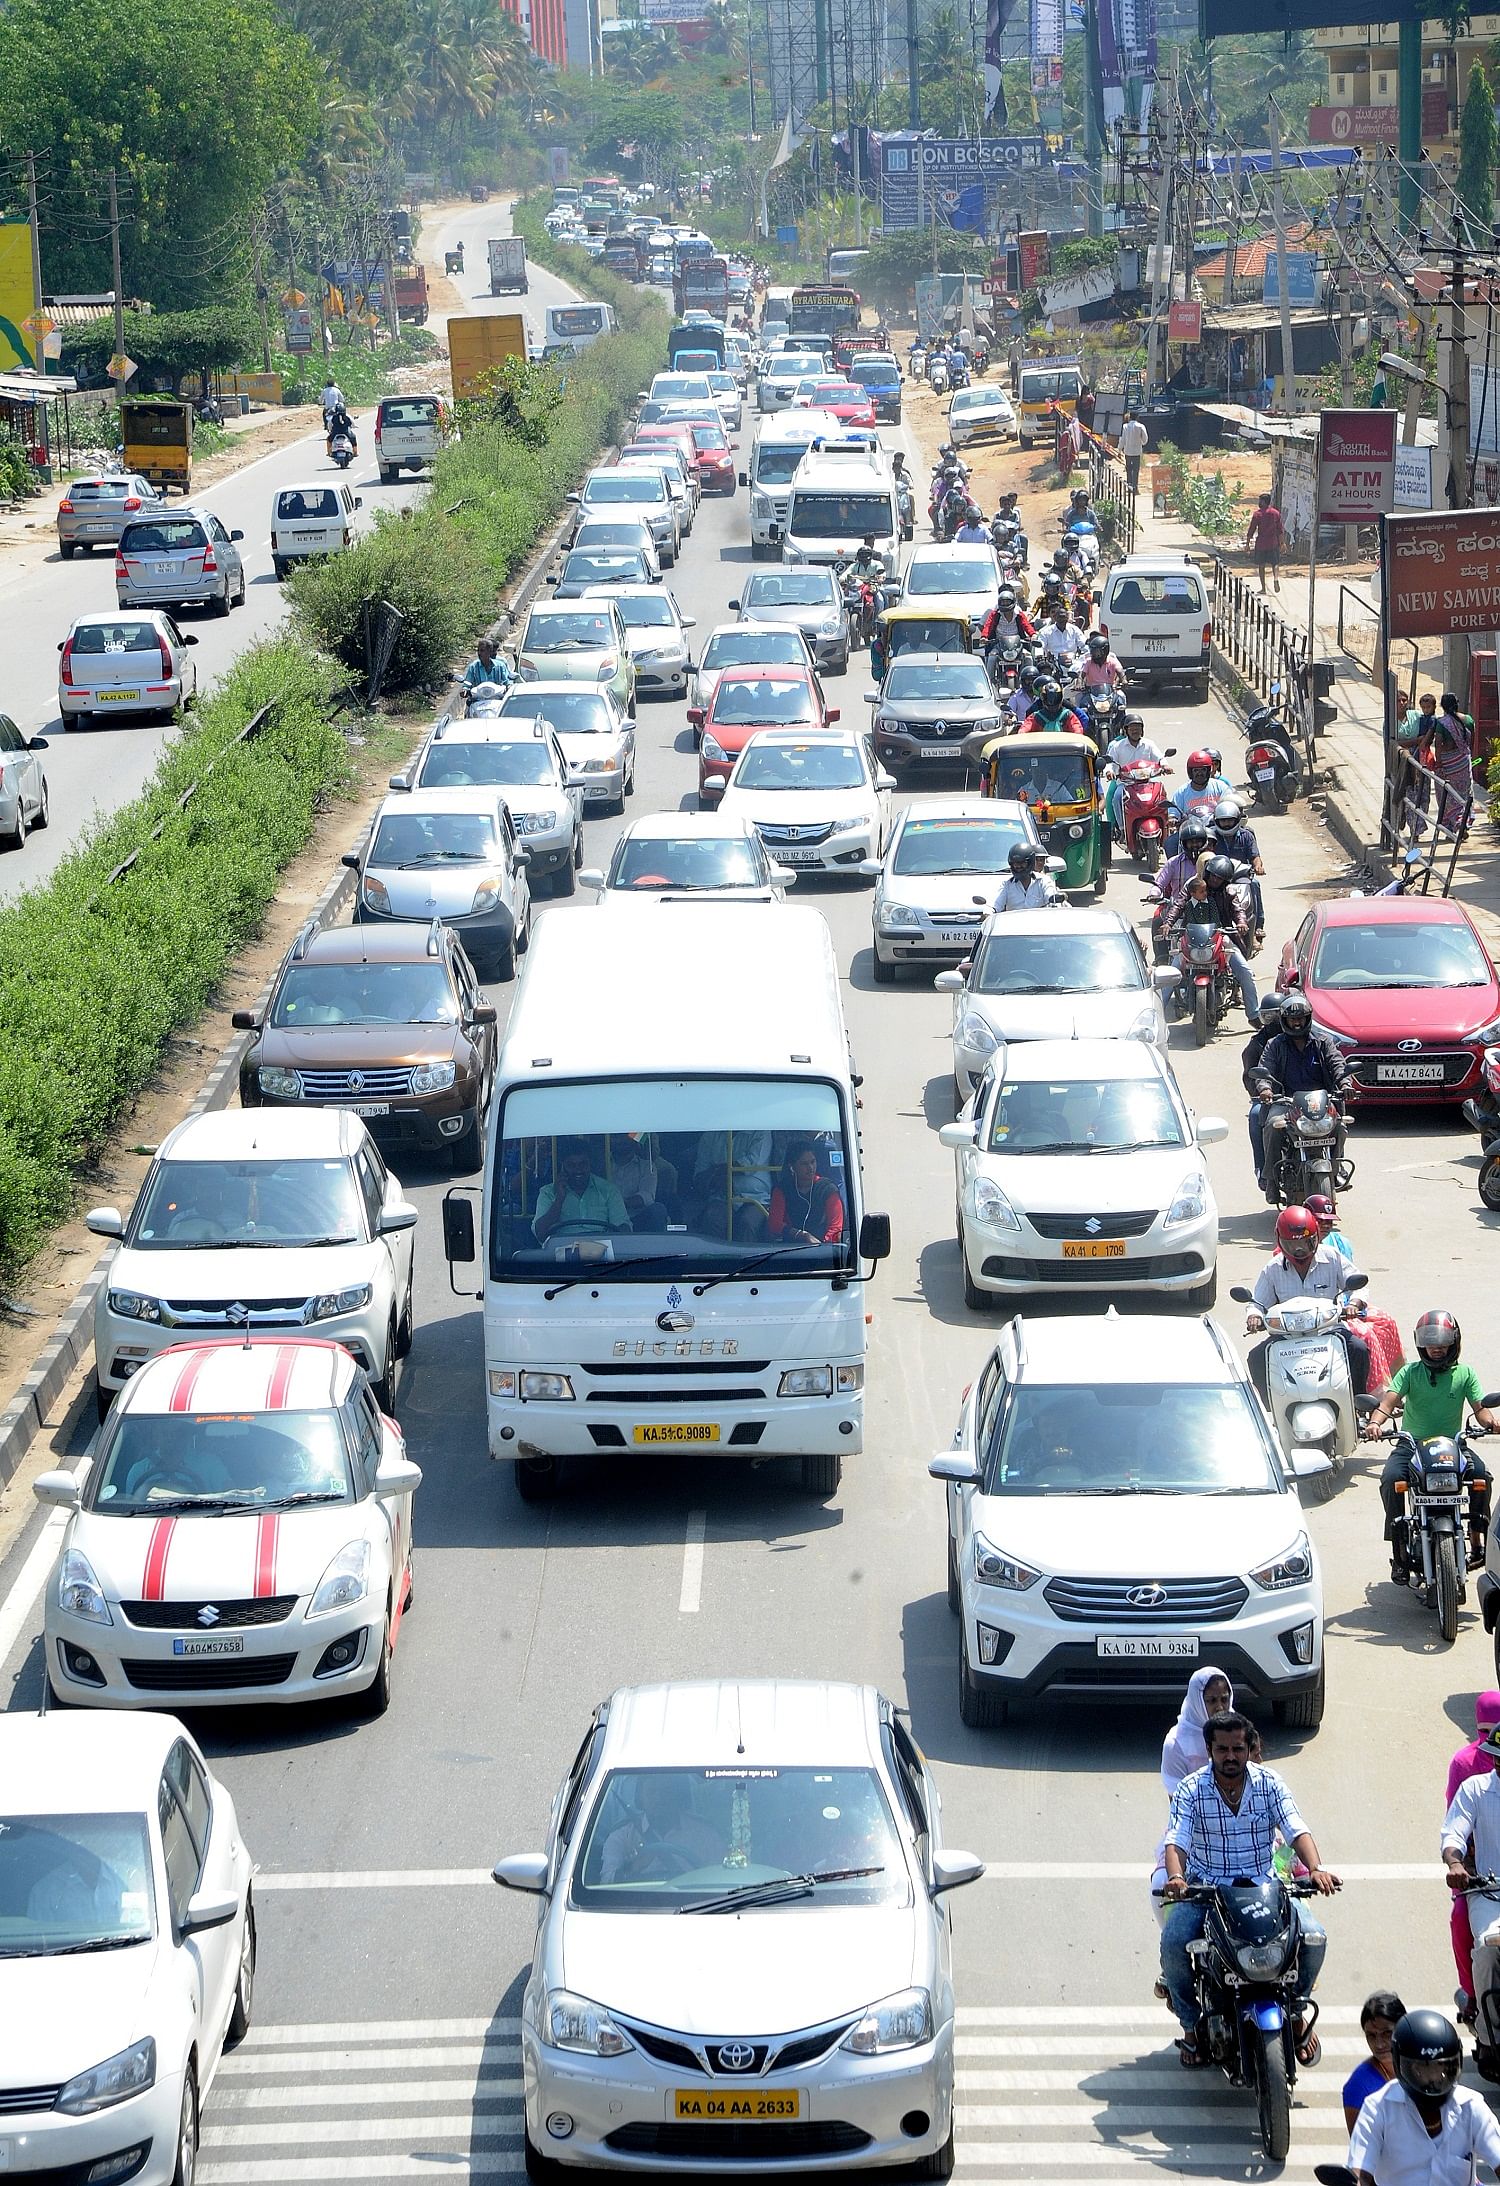 Citizens want the new government to address Bengaluru’s traffic nightmares.